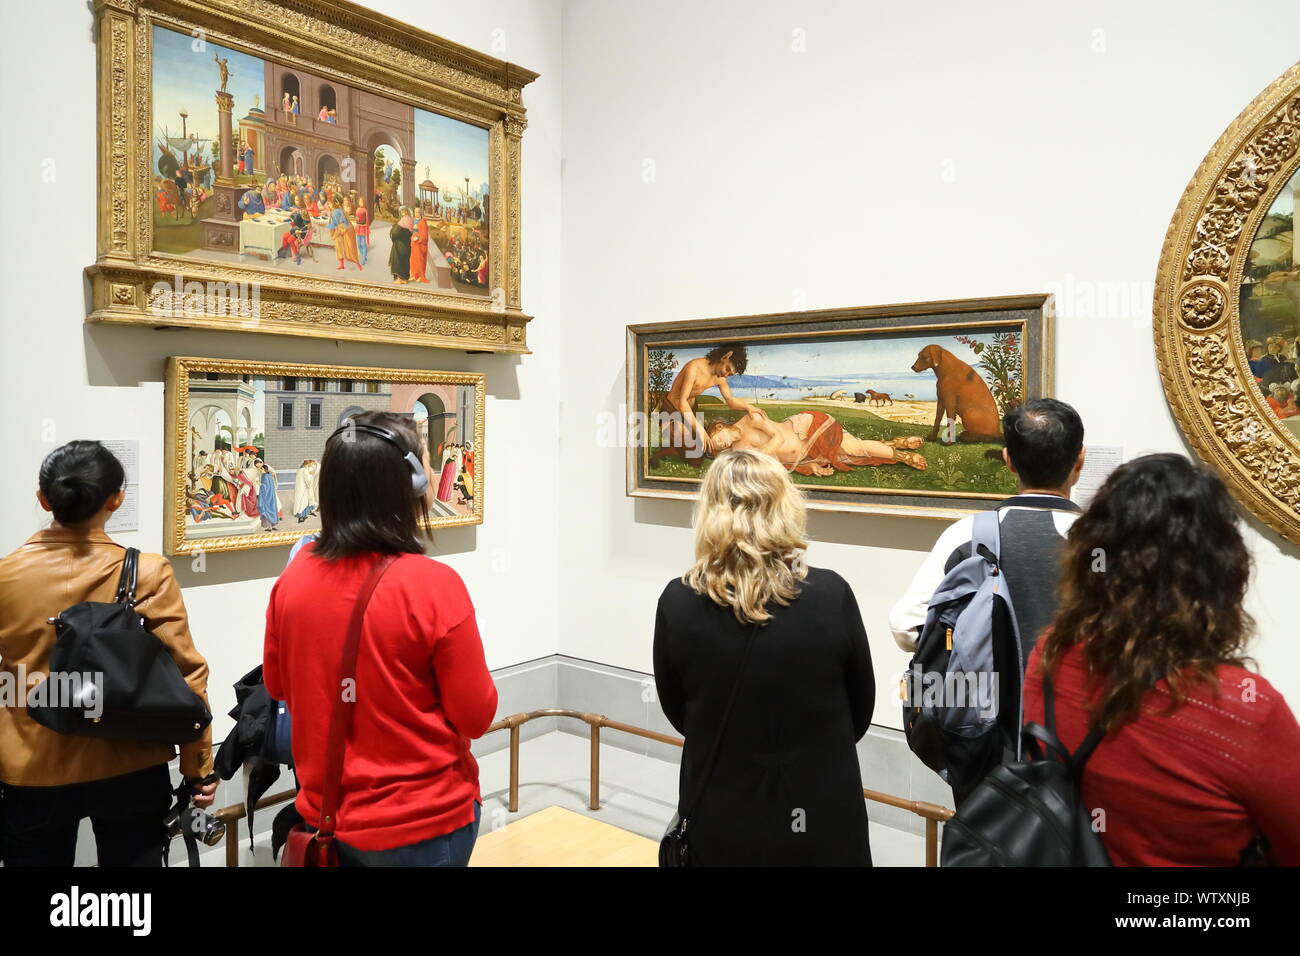 Visitors studying the painting A Satyr mourning over a Nymph by Italian Renaissance painter Piero di Cosimo at the National Gallery, London, UK Stock Photo